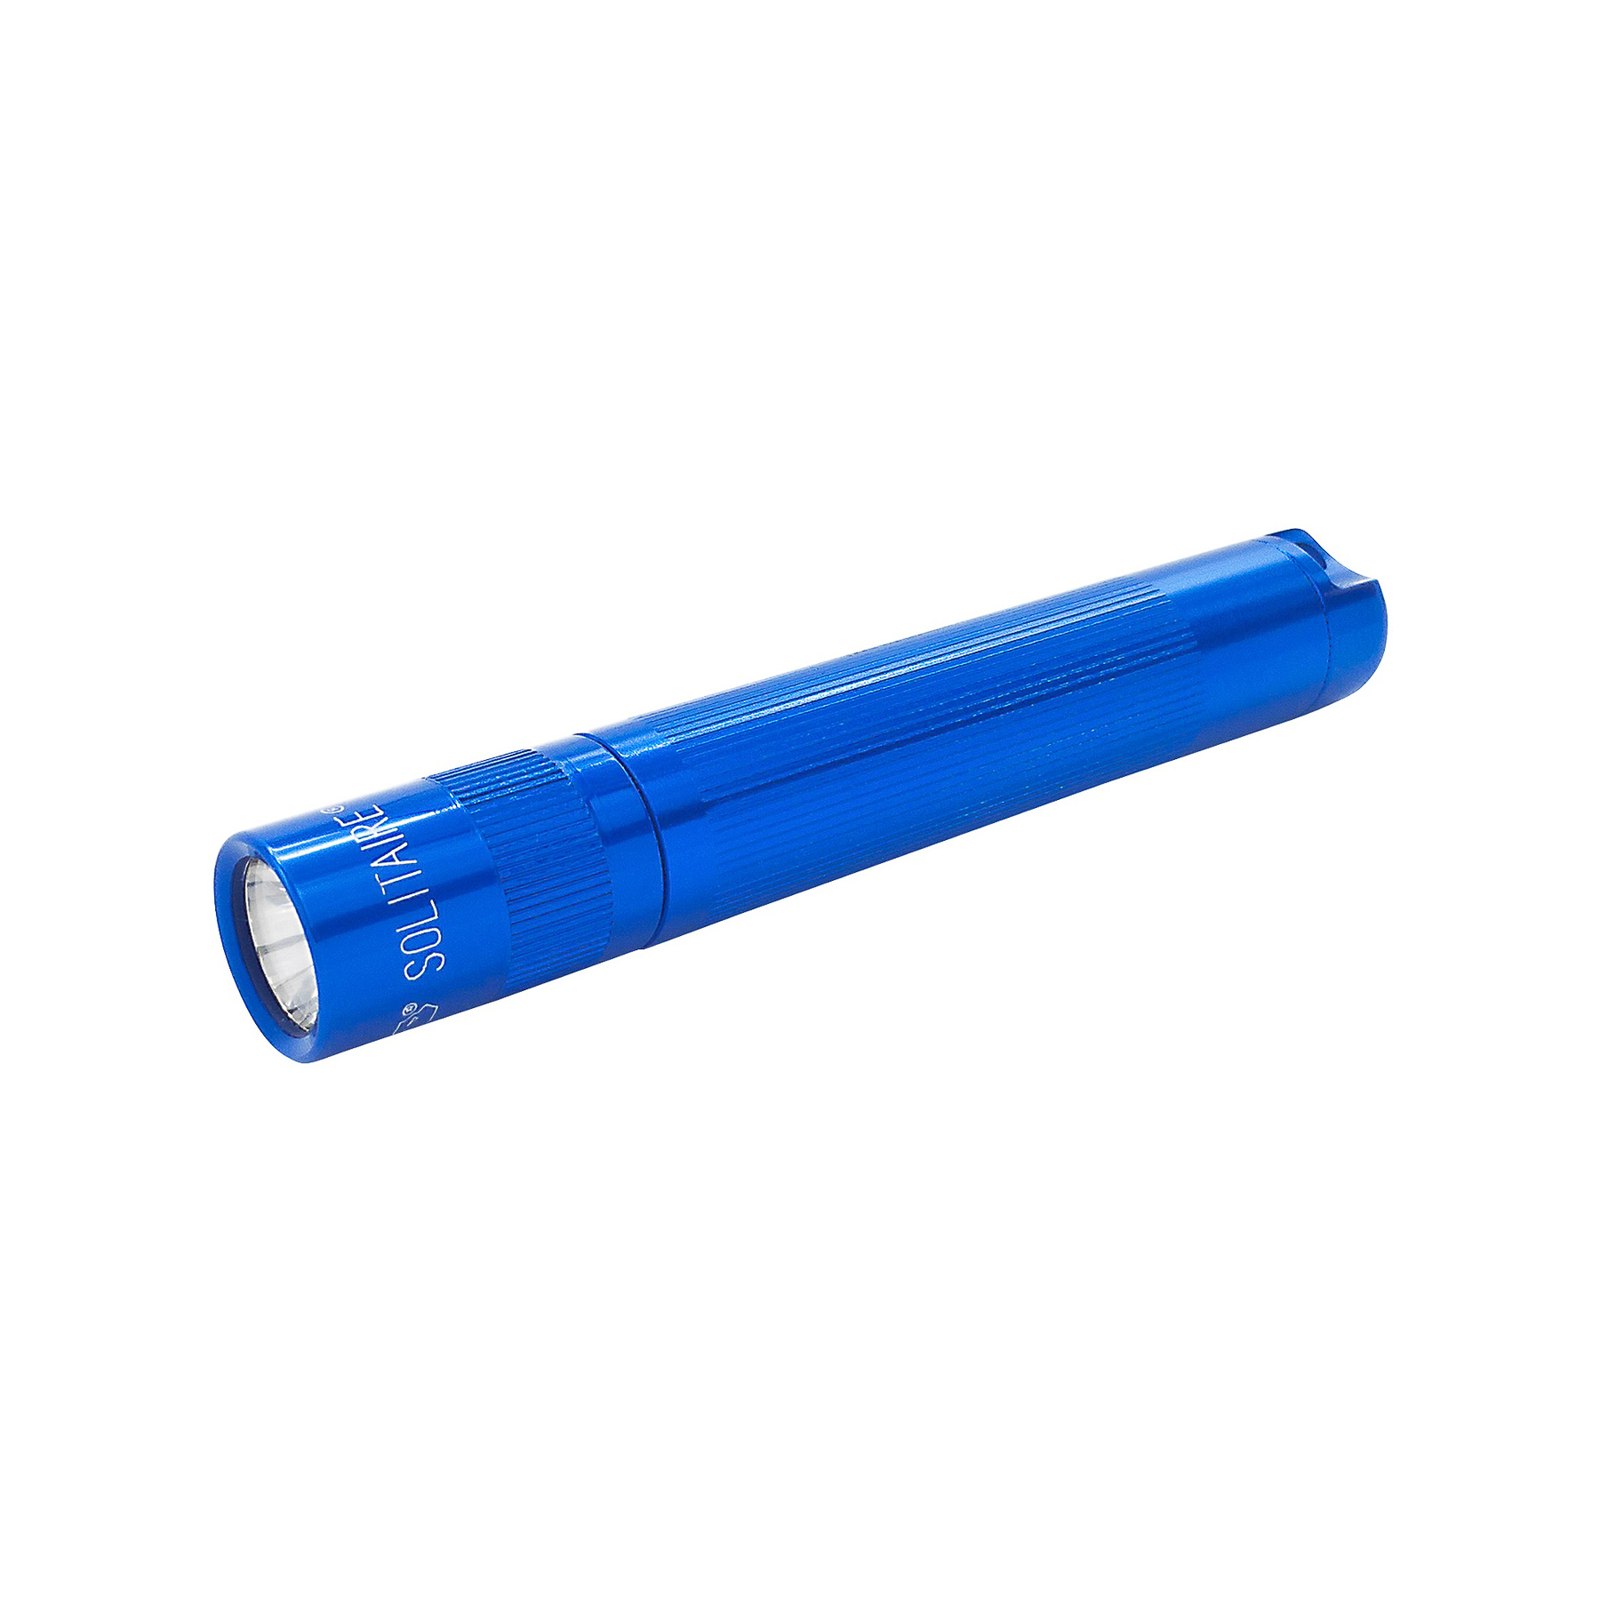 Maglite Zaklamp Solitaire 1-Cell AAA blauw